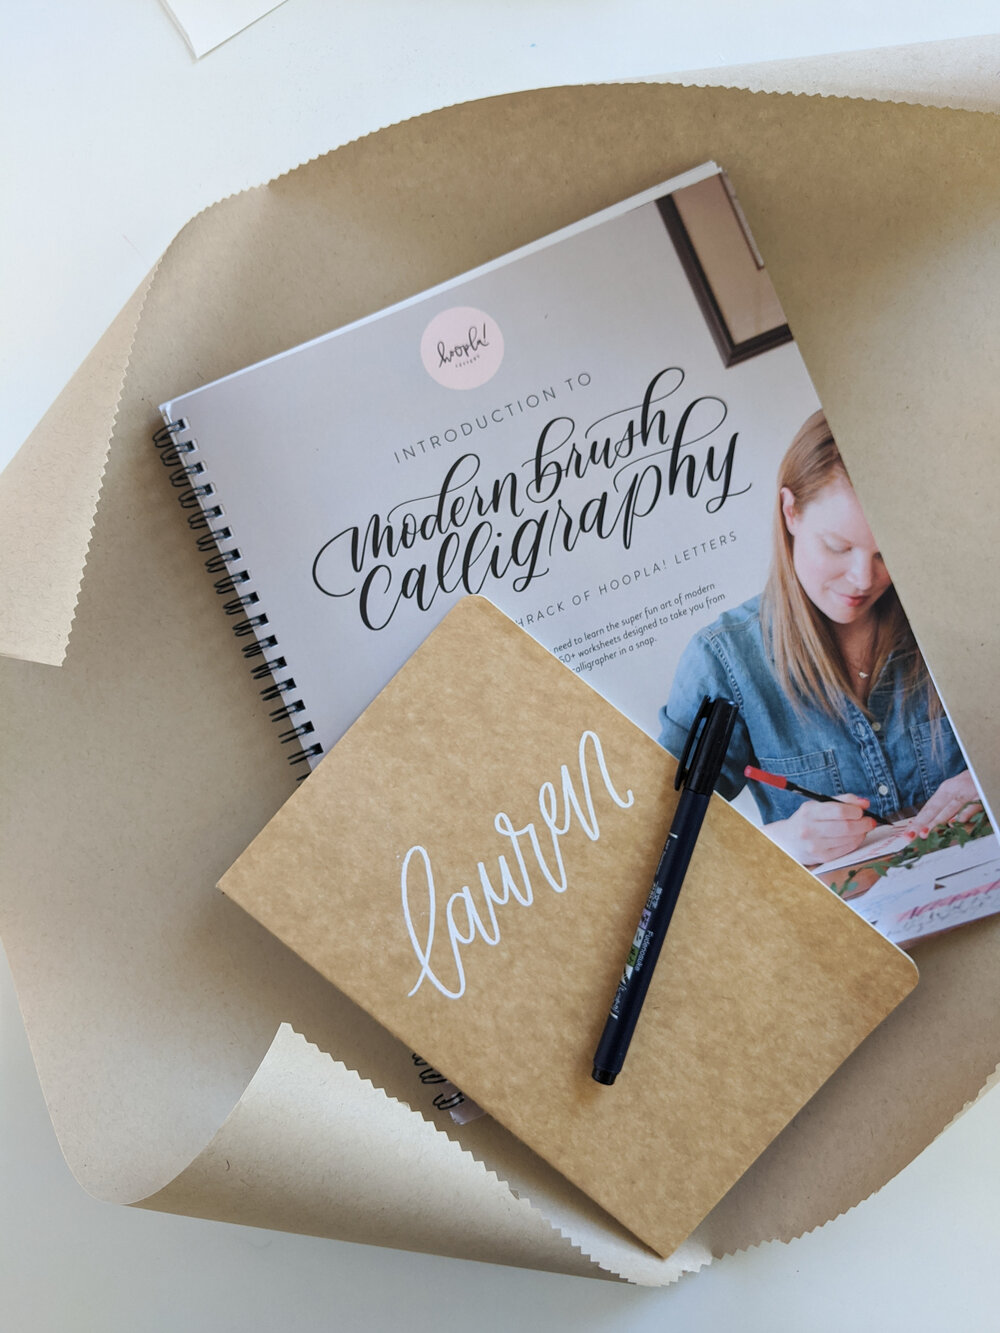 By Hand Lettering Kit